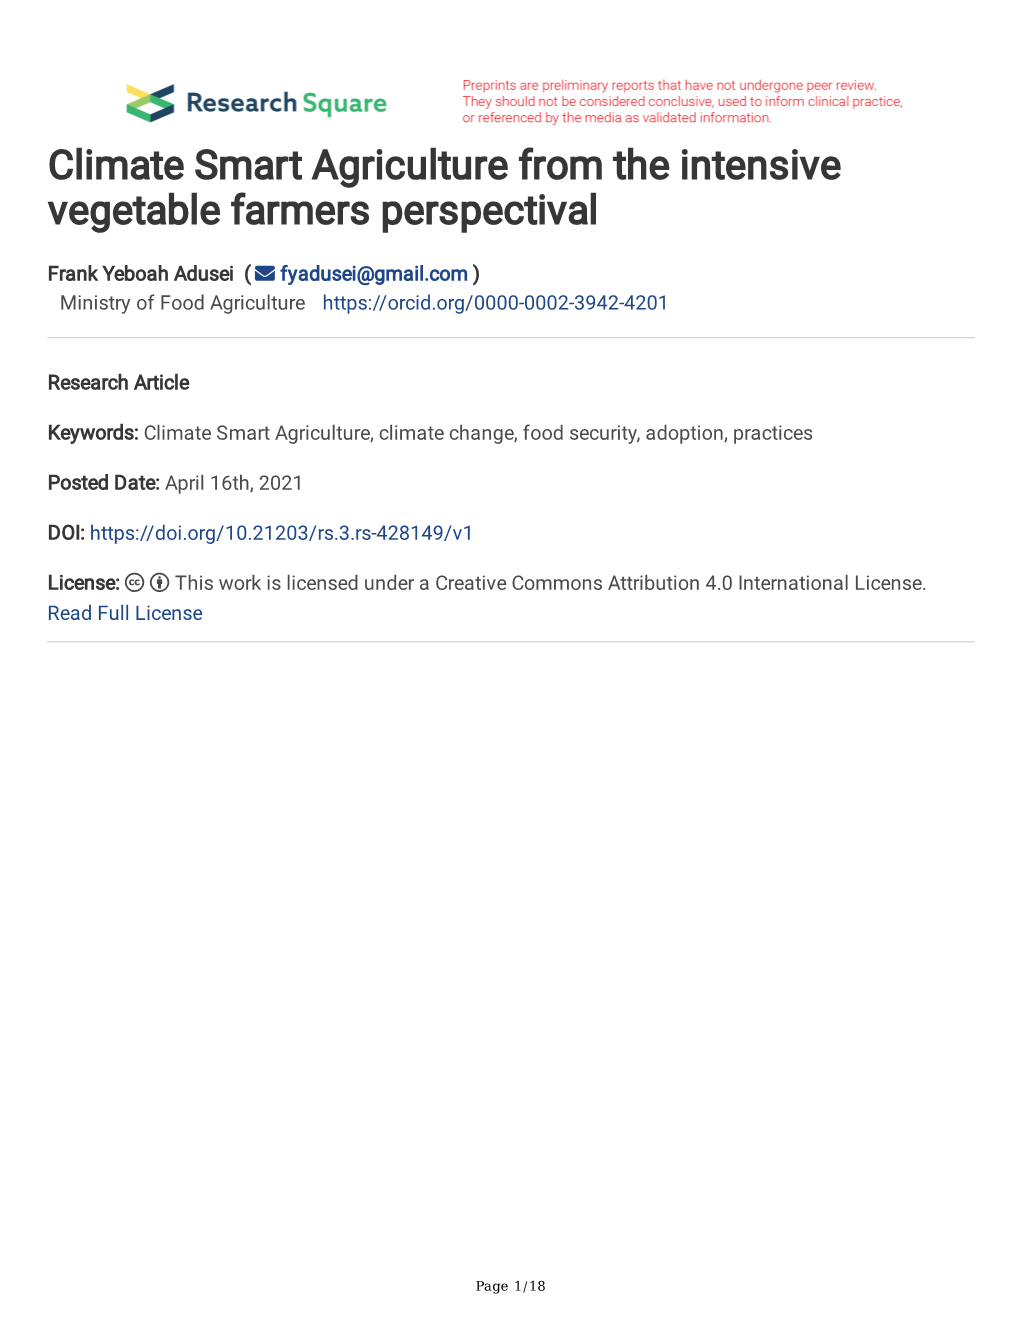 Climate Smart Agriculture from the Intensive Vegetable Farmers Perspectival